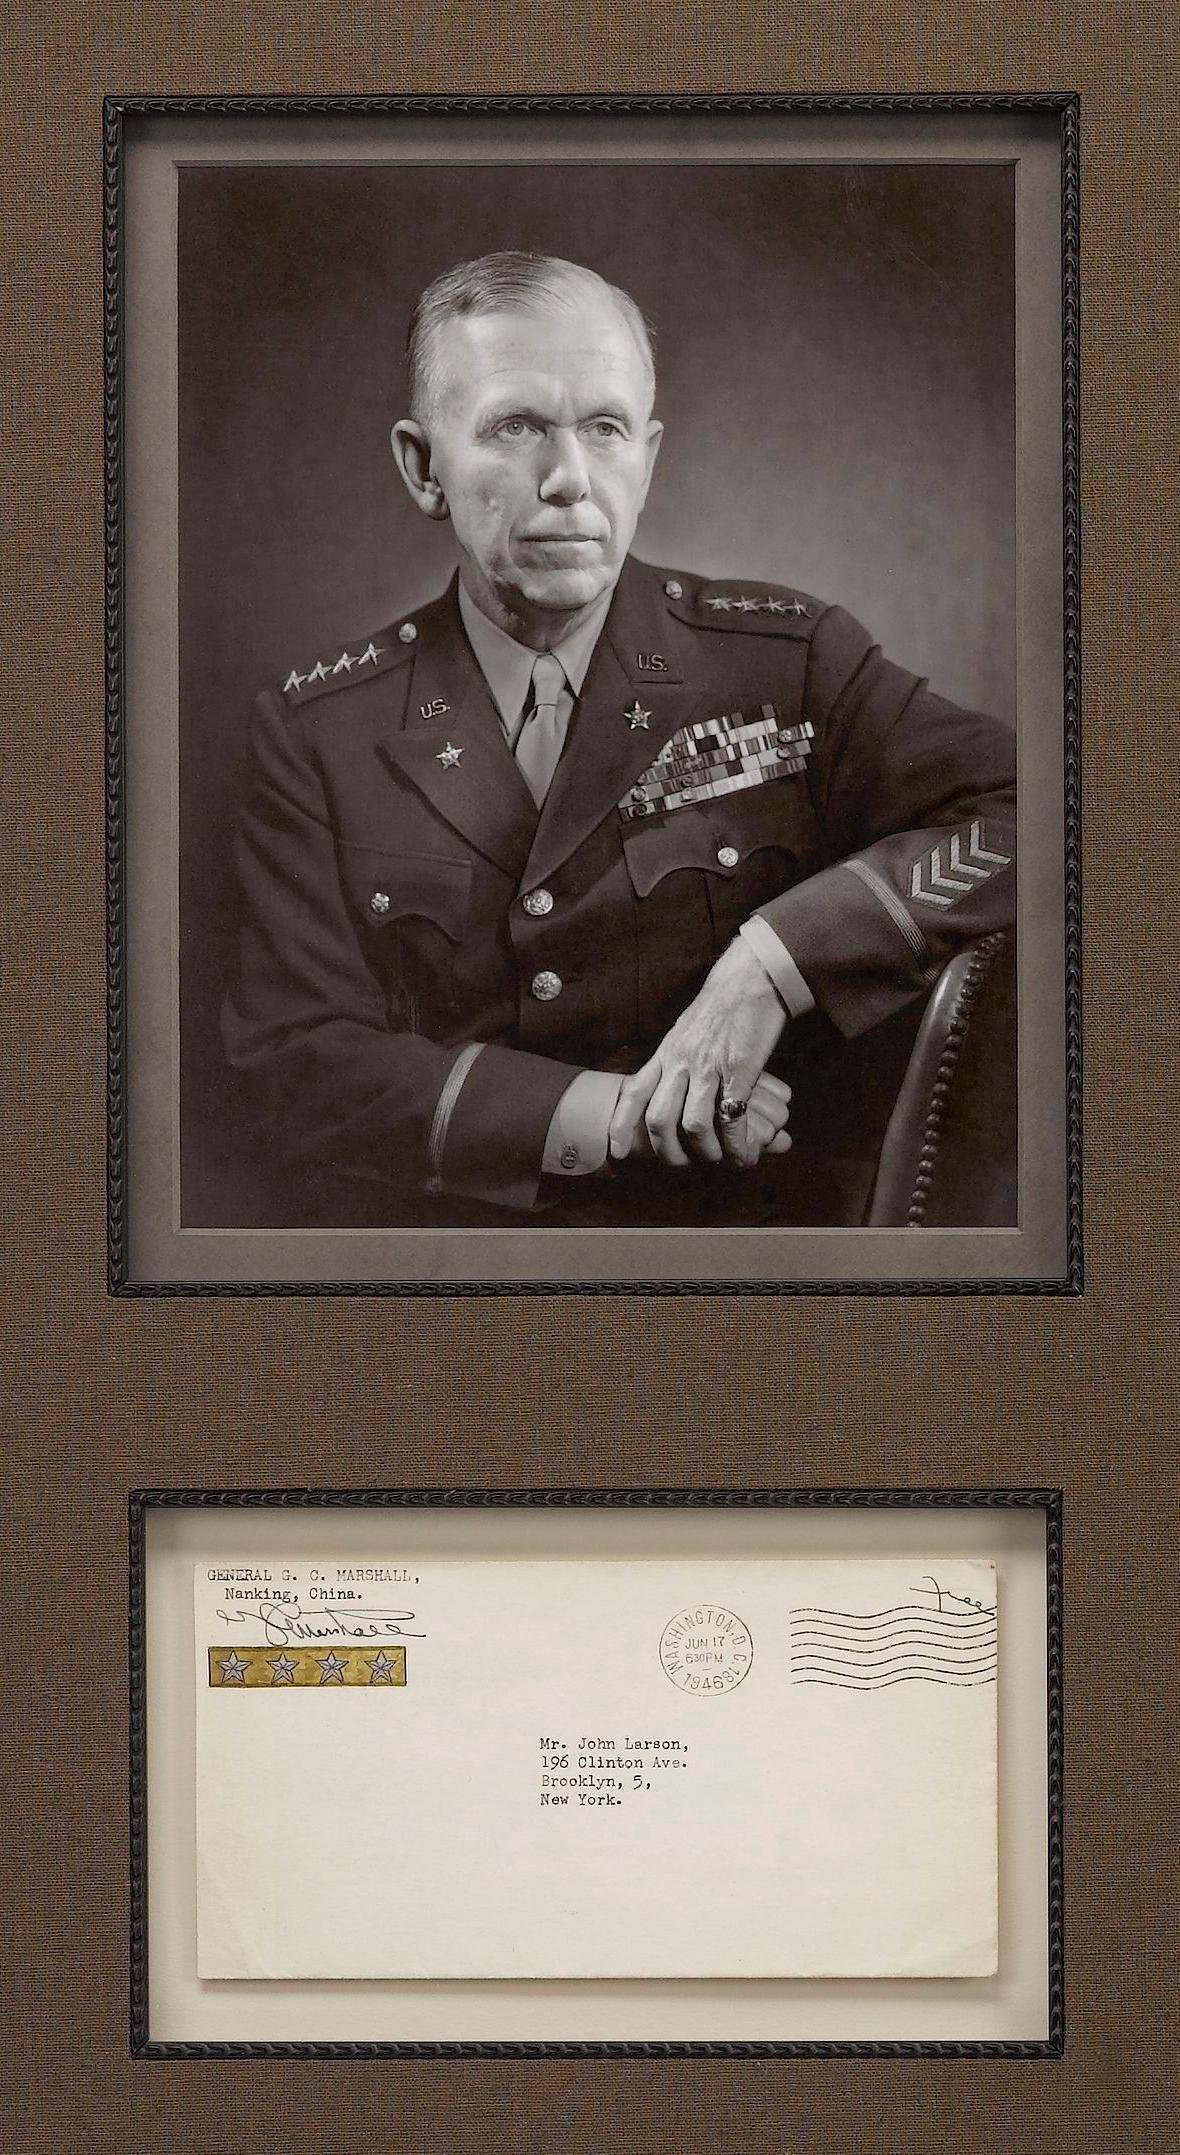 This is a collage featuring signatures of all of the American five star generals. The collage includes signed and inscribed photographs by Omar Bradley, Henry H. Arnold, and Douglas MacArthur, a signed free frank envelope by George C. Marshall, and